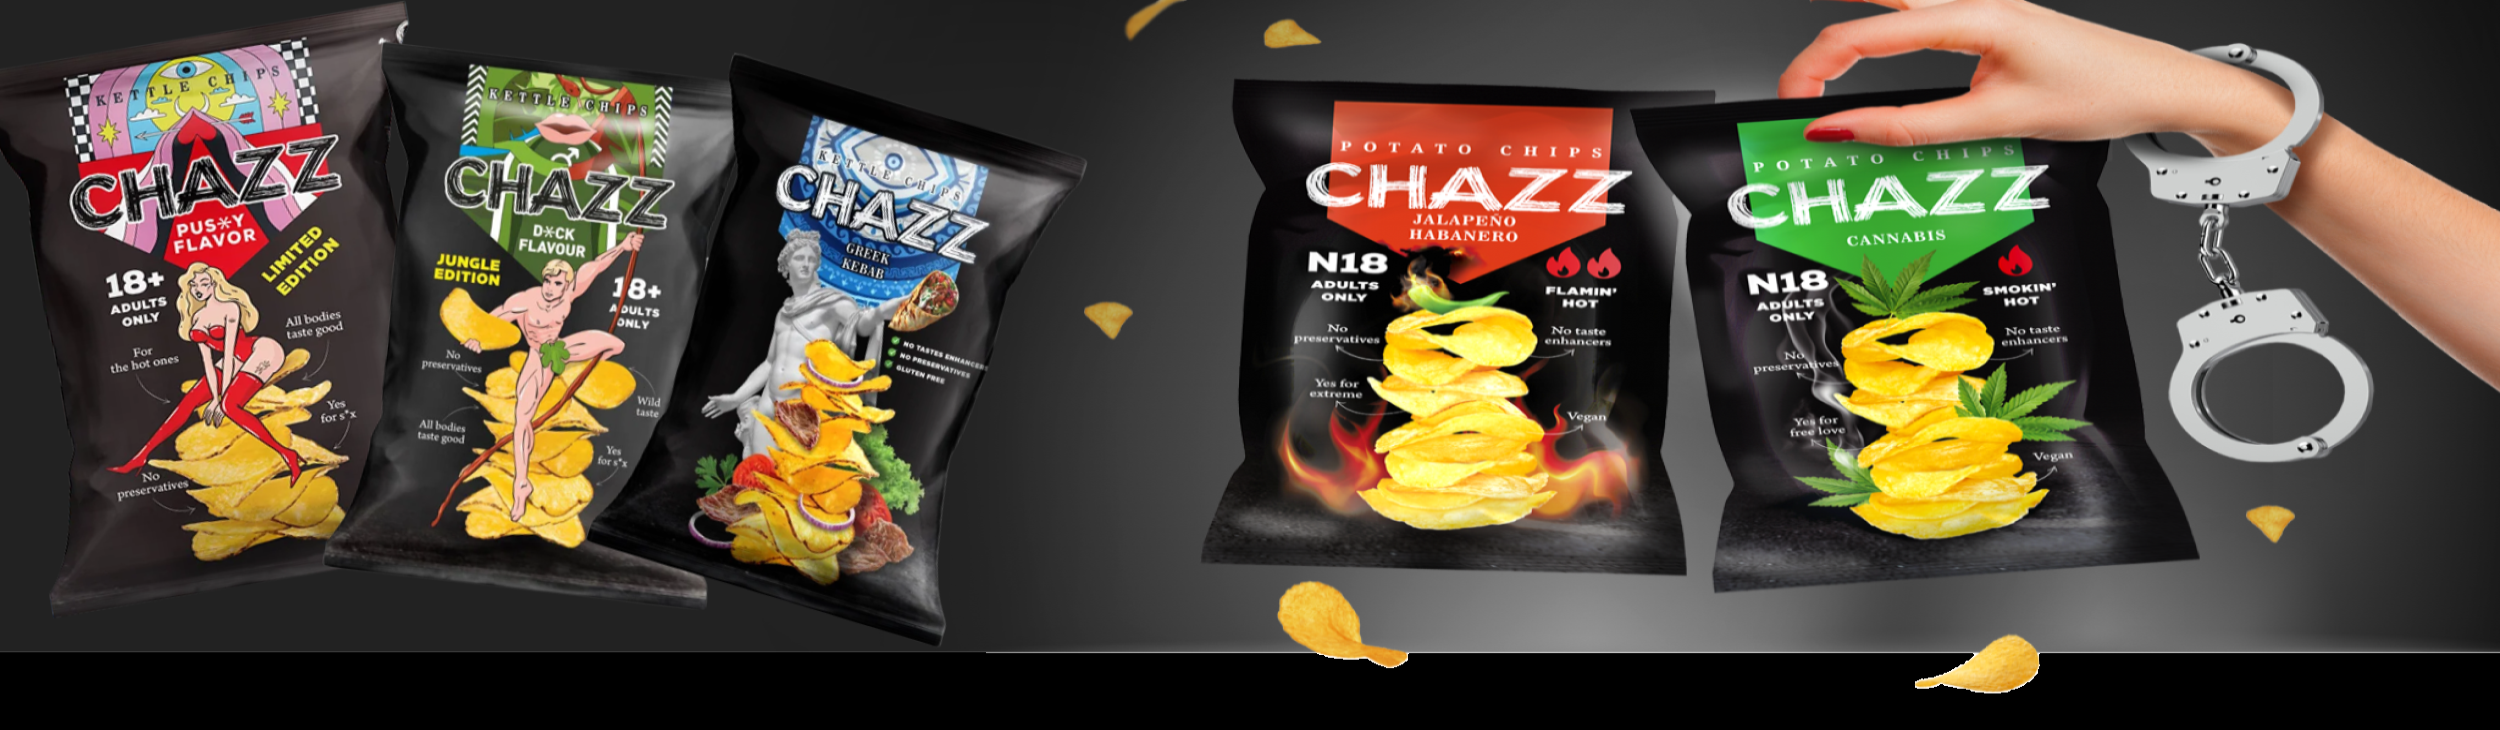 Chazz Chips